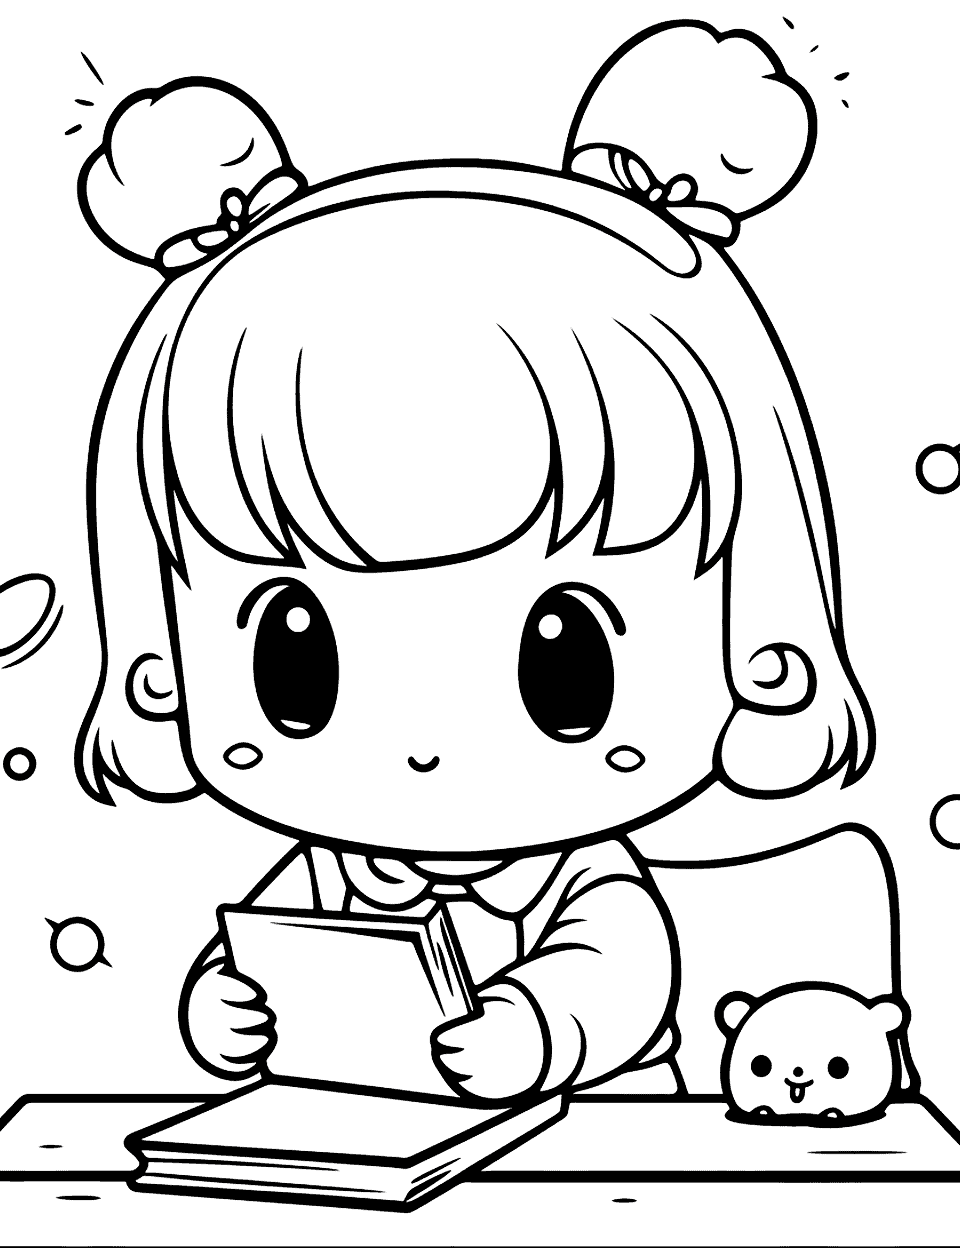 Kawaii Drawing with Anime Girl Coloring Page - An Anime girl engrossed in creating her masterpiece Kawaii drawing.